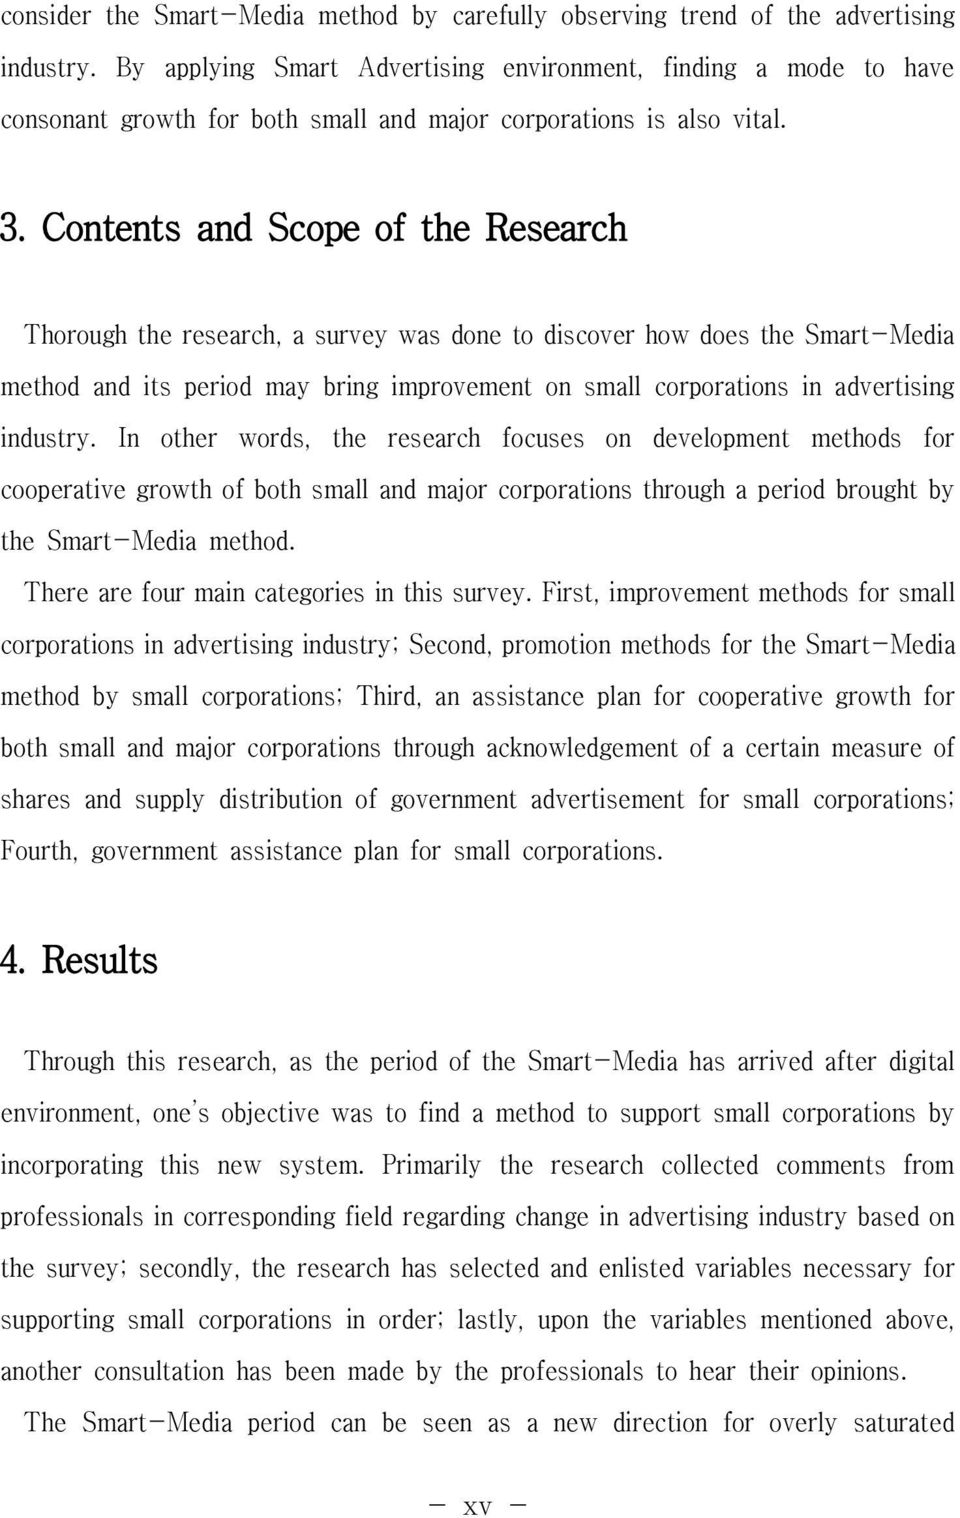 ContentsandScopeoftheResearch Thorough the research, a survey was done to discover how does the Smart-Media method and its period may bring improvement on small corporations in advertising industry.